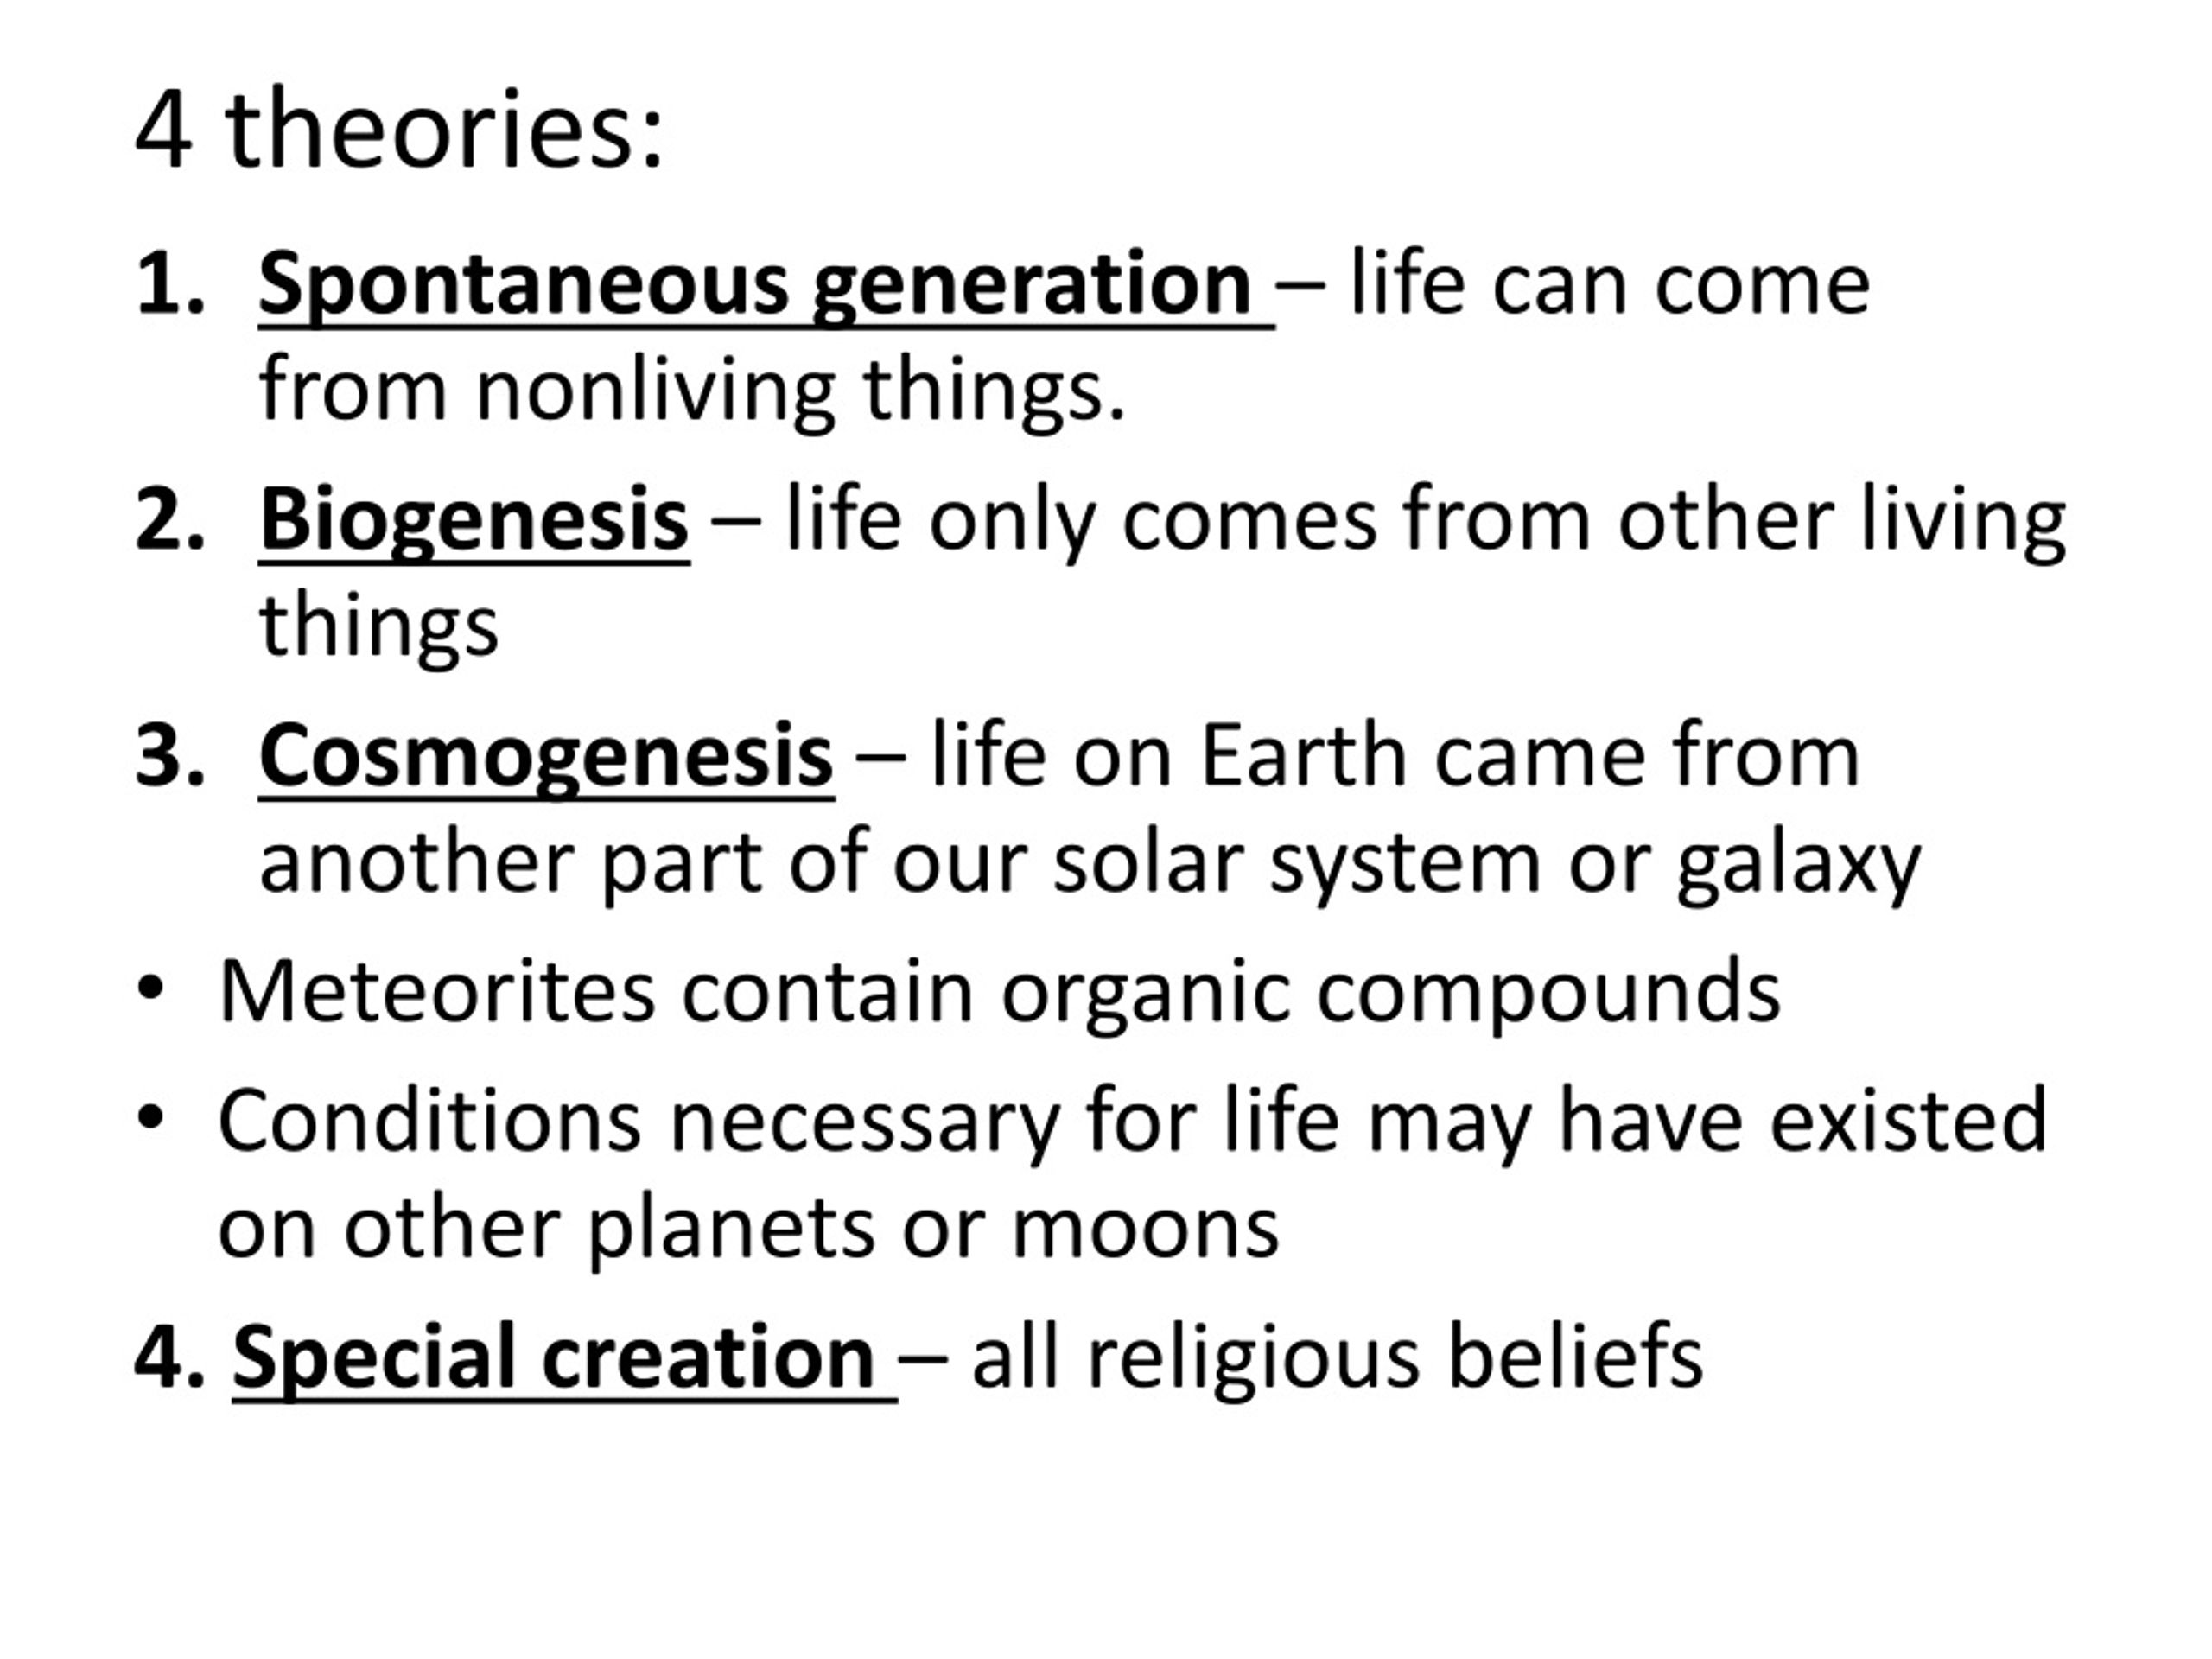 theories on the origin of life essay 300 words